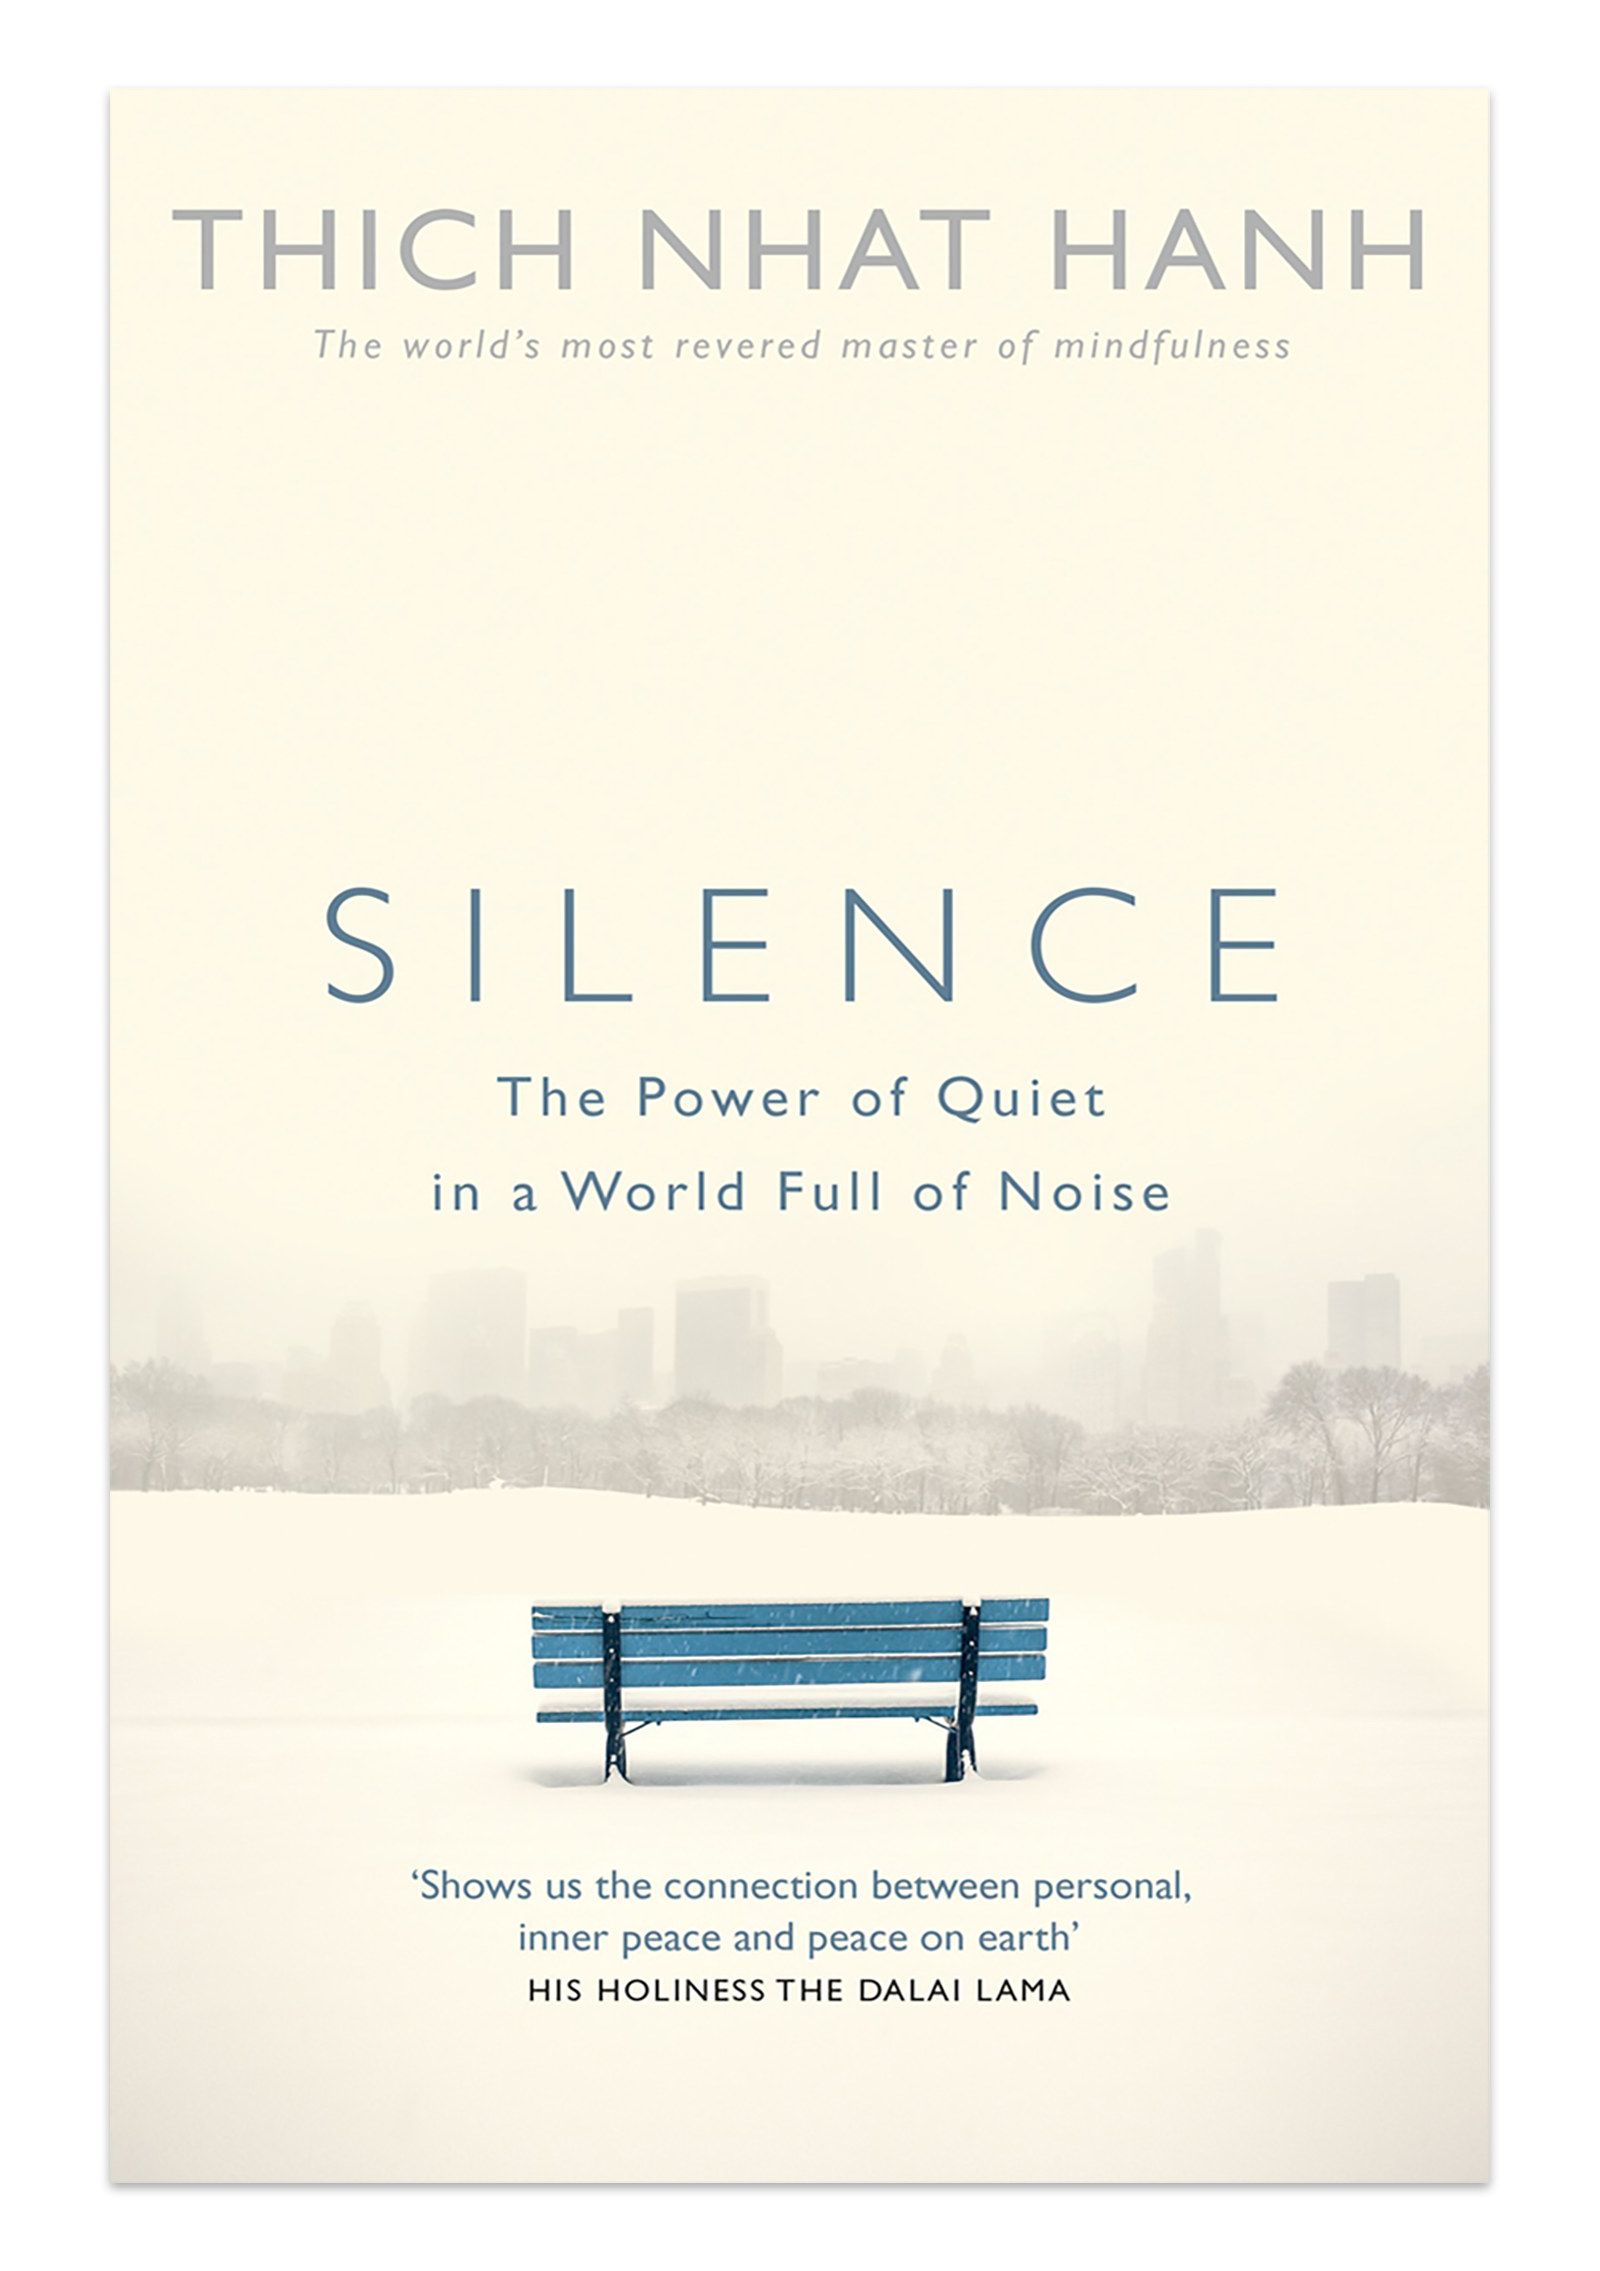 Silence: The Power of Quiet in a World Full of Noise book